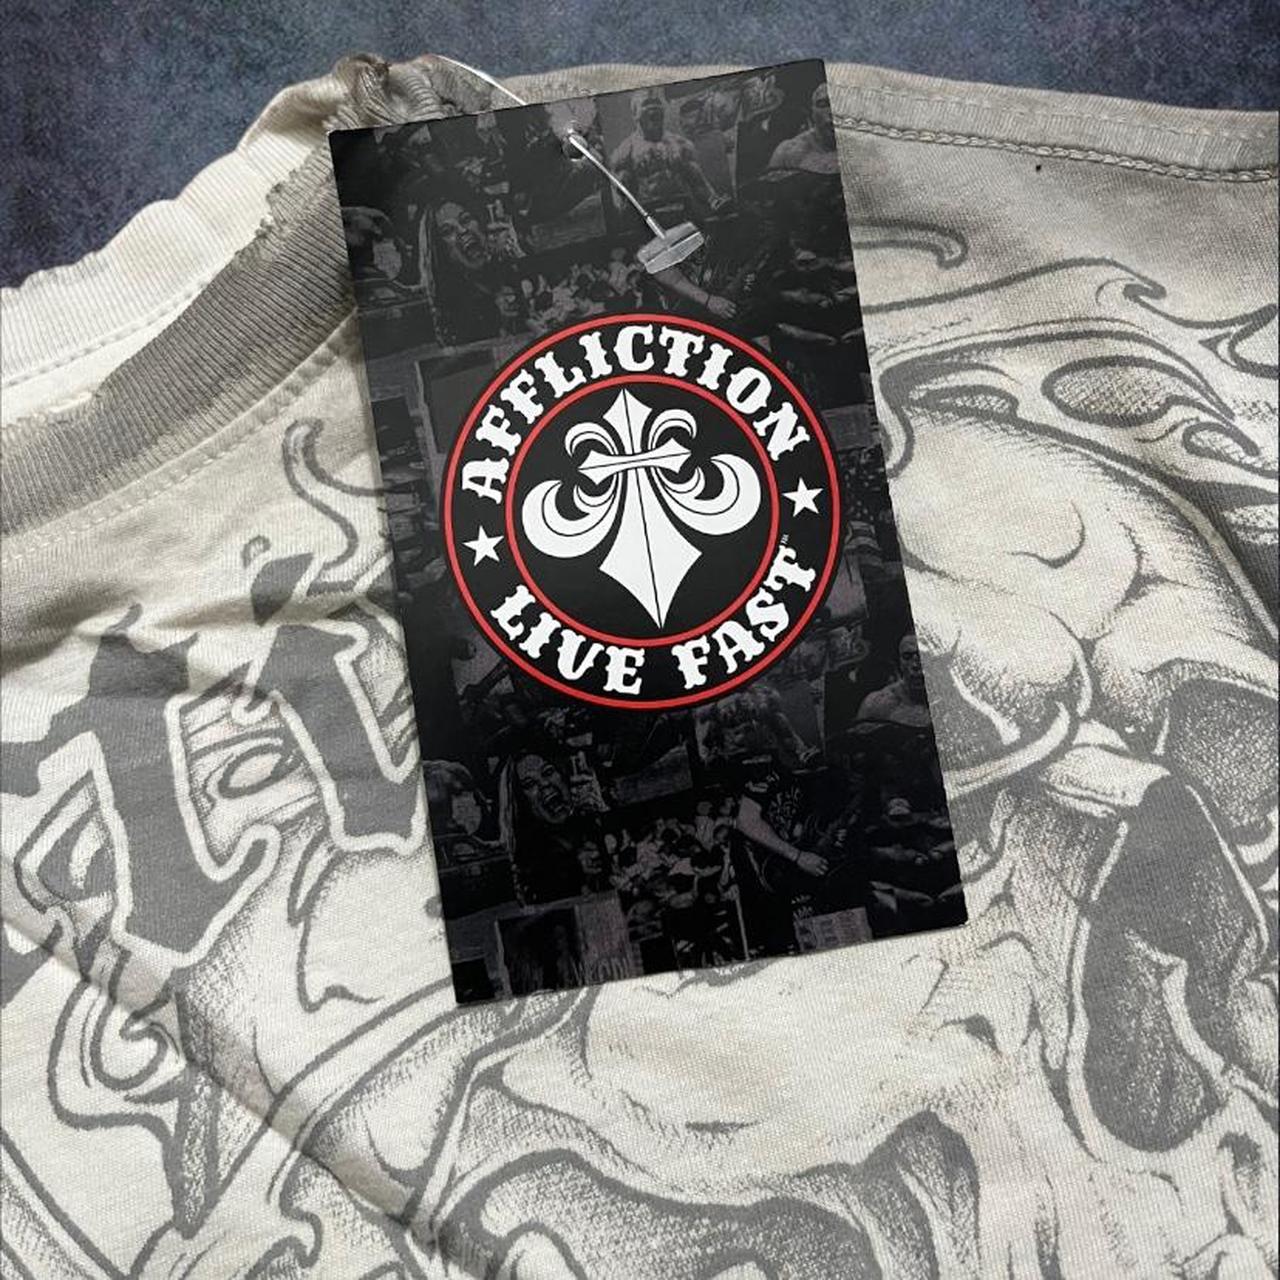 Affliction Men's Grey and White T-shirt (5)